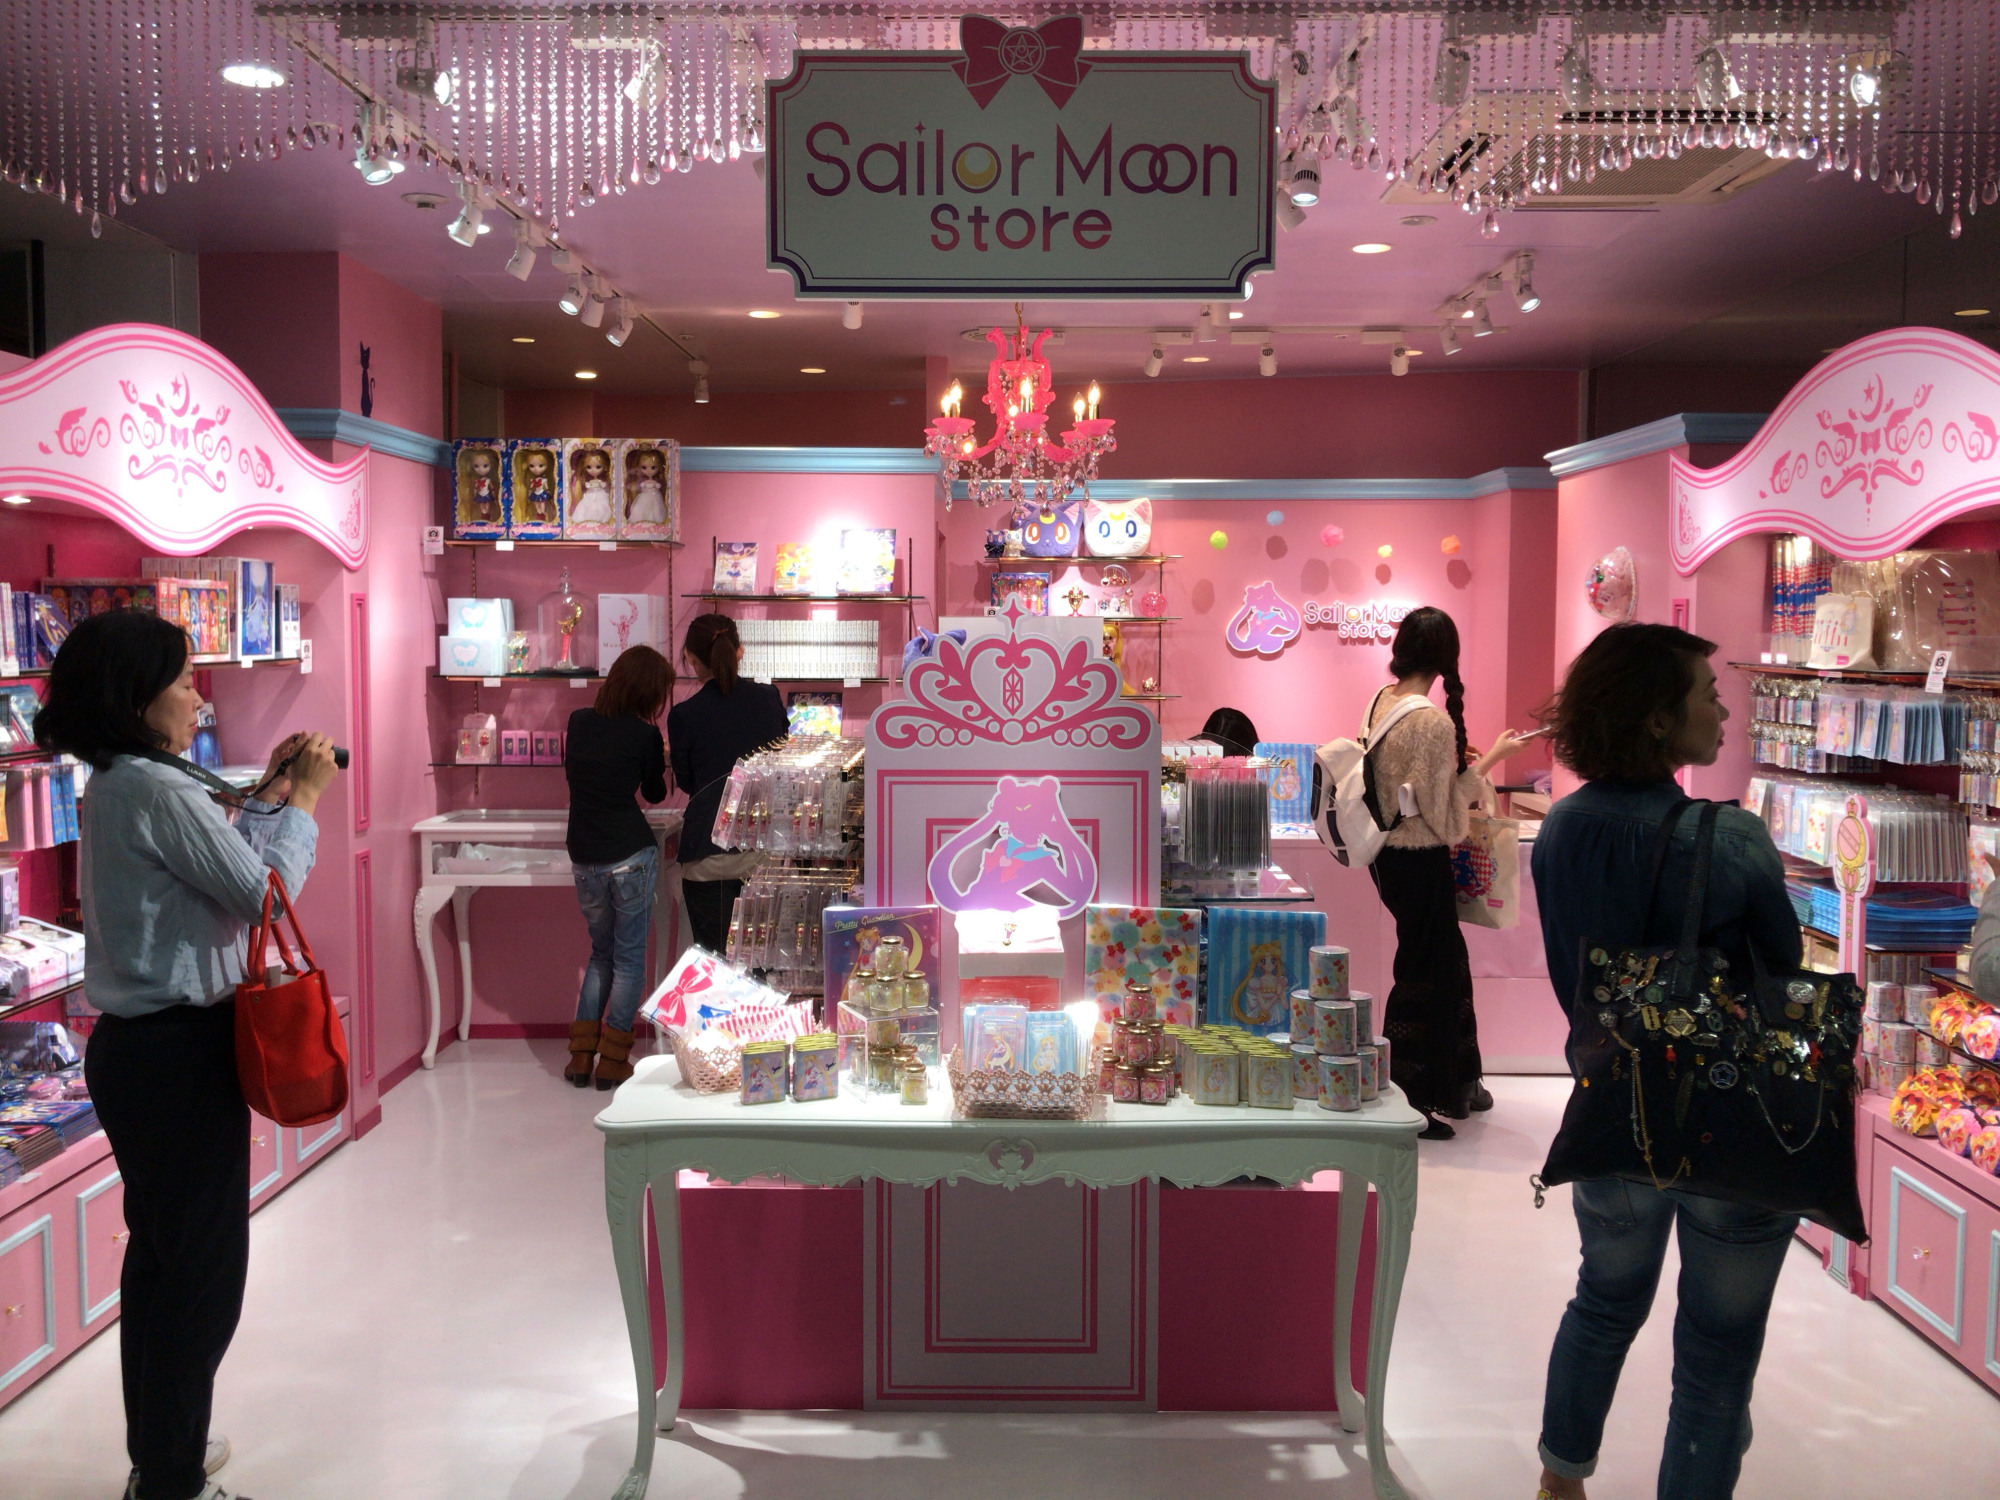 People look at the new Sailor Moon store in Tokyo's trendy Harajuku district during a media preview Saturday morning. It opened to the public later in the day. | KAZUAKI NAGATA